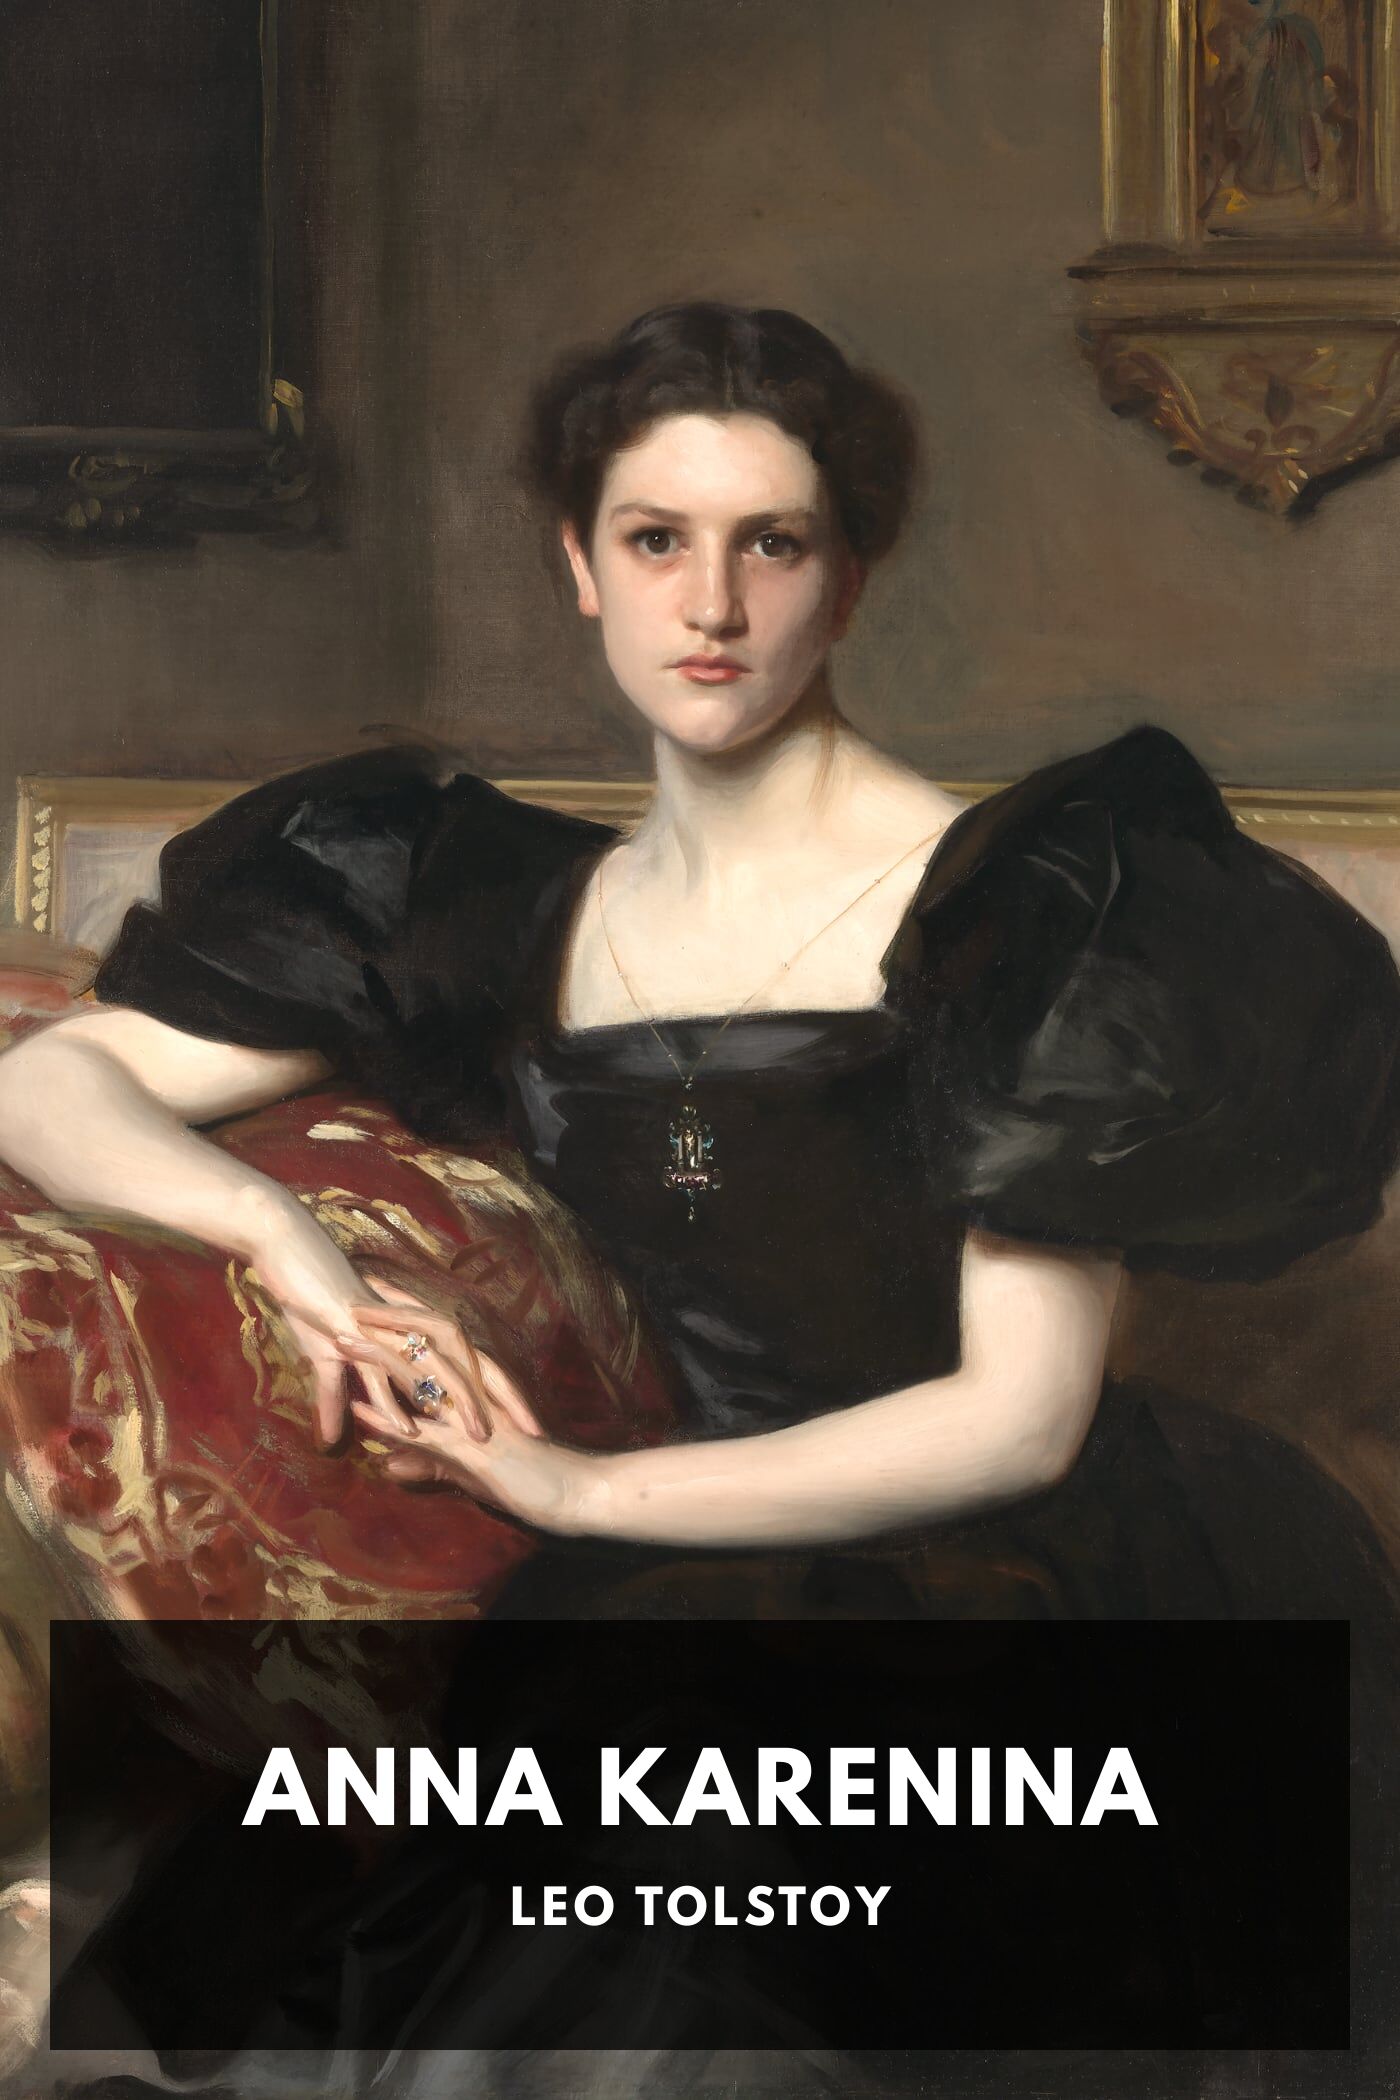 Anna Karenina, by Leo Tolstoy. Translated by Constance Garnett - Free ebook  download - Standard Ebooks: Free and liberated ebooks, carefully produced  for the true book lover.